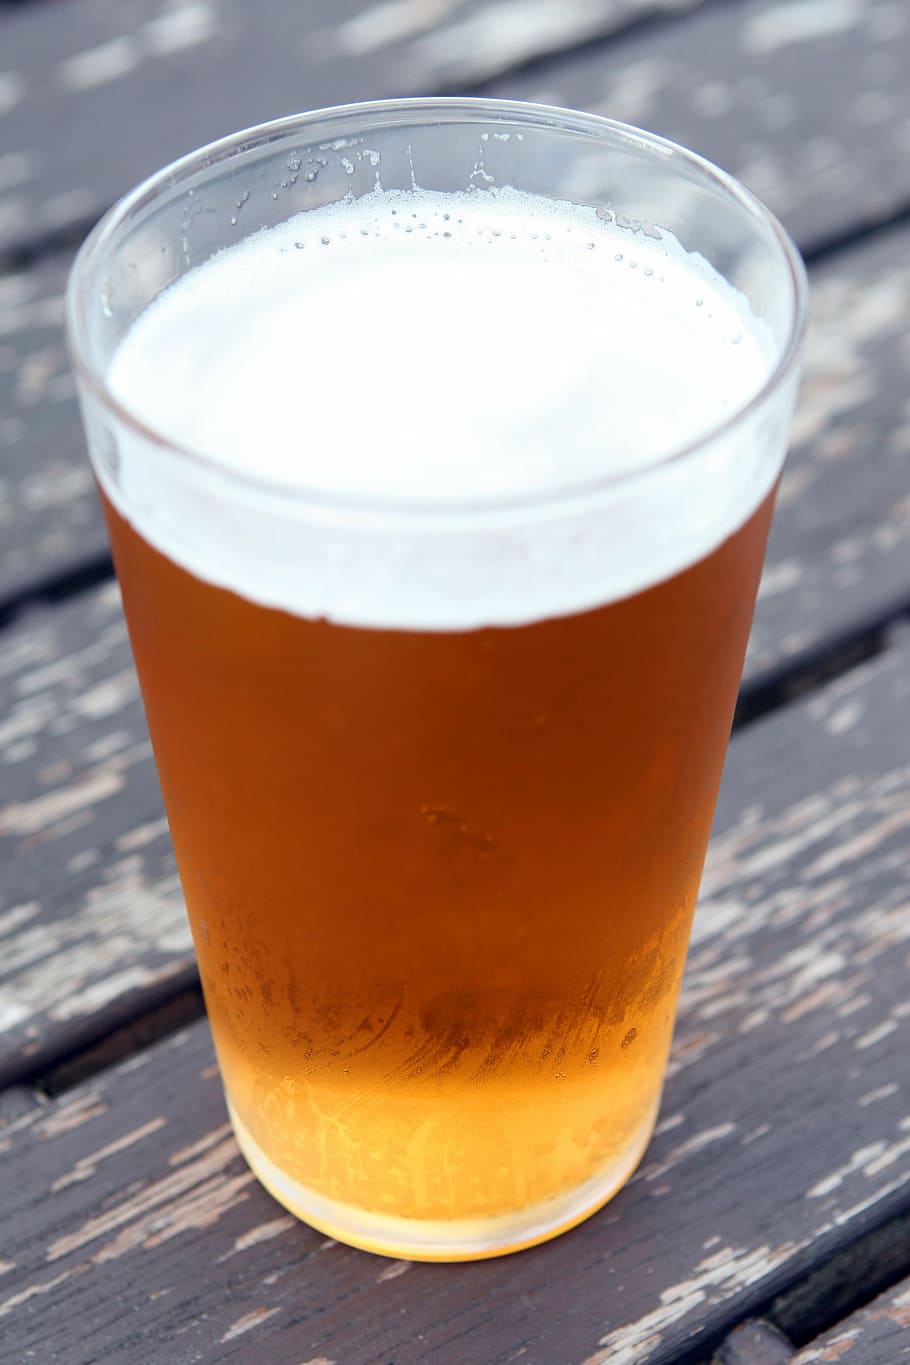 clear glass filled with beer, alcohol, alcoholic, ale, bar, close-up